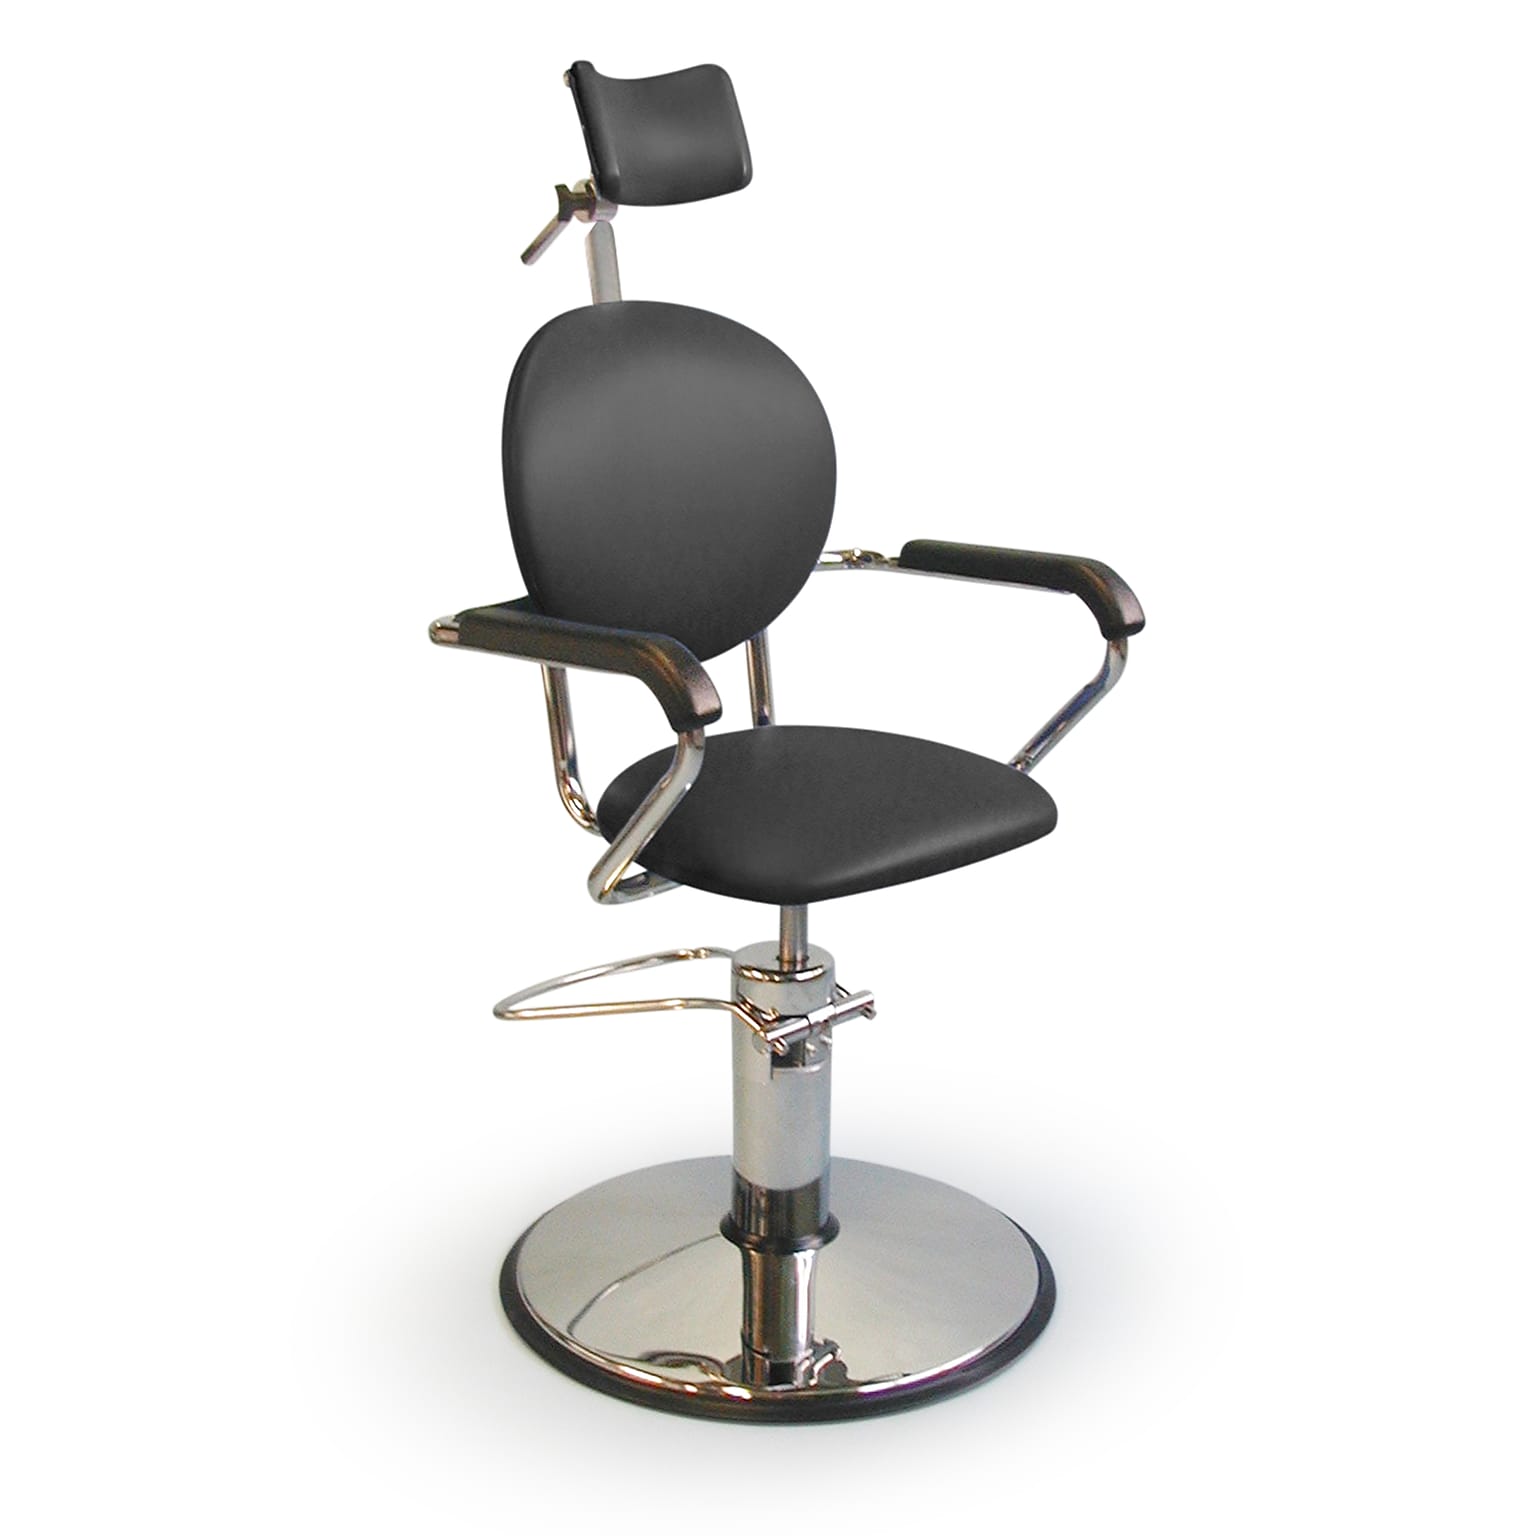 Brandt Compact Treatment Chair with Hydraulic Base (23030)